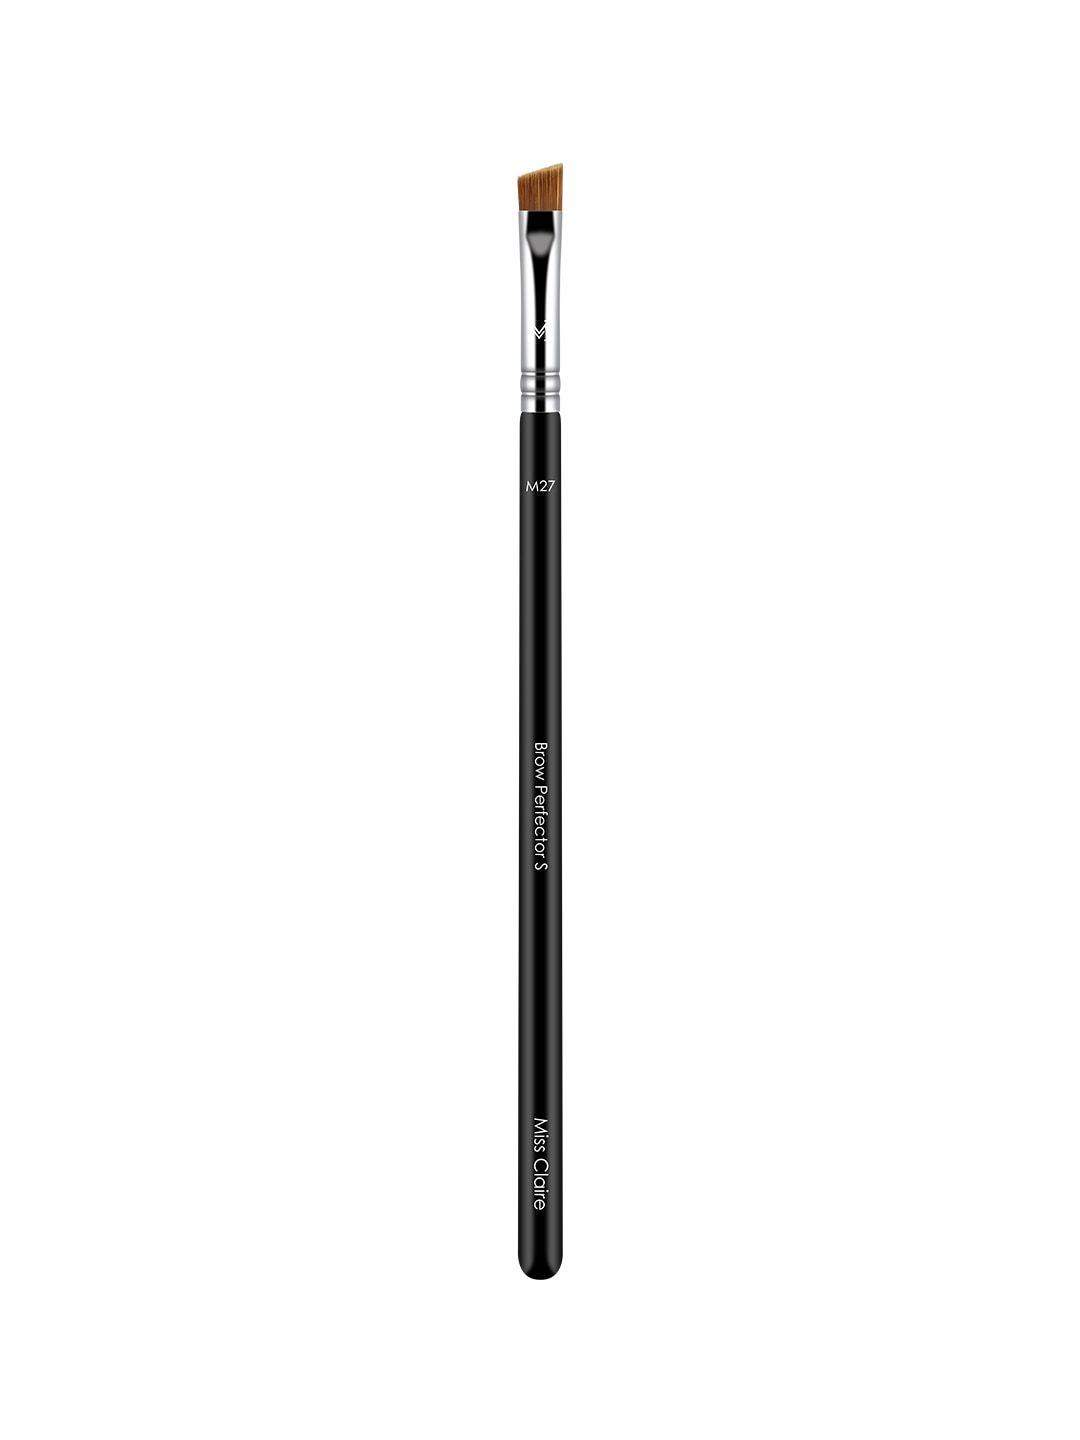 miss claire m27 - brow perfector brush (s) - silver-toned & black